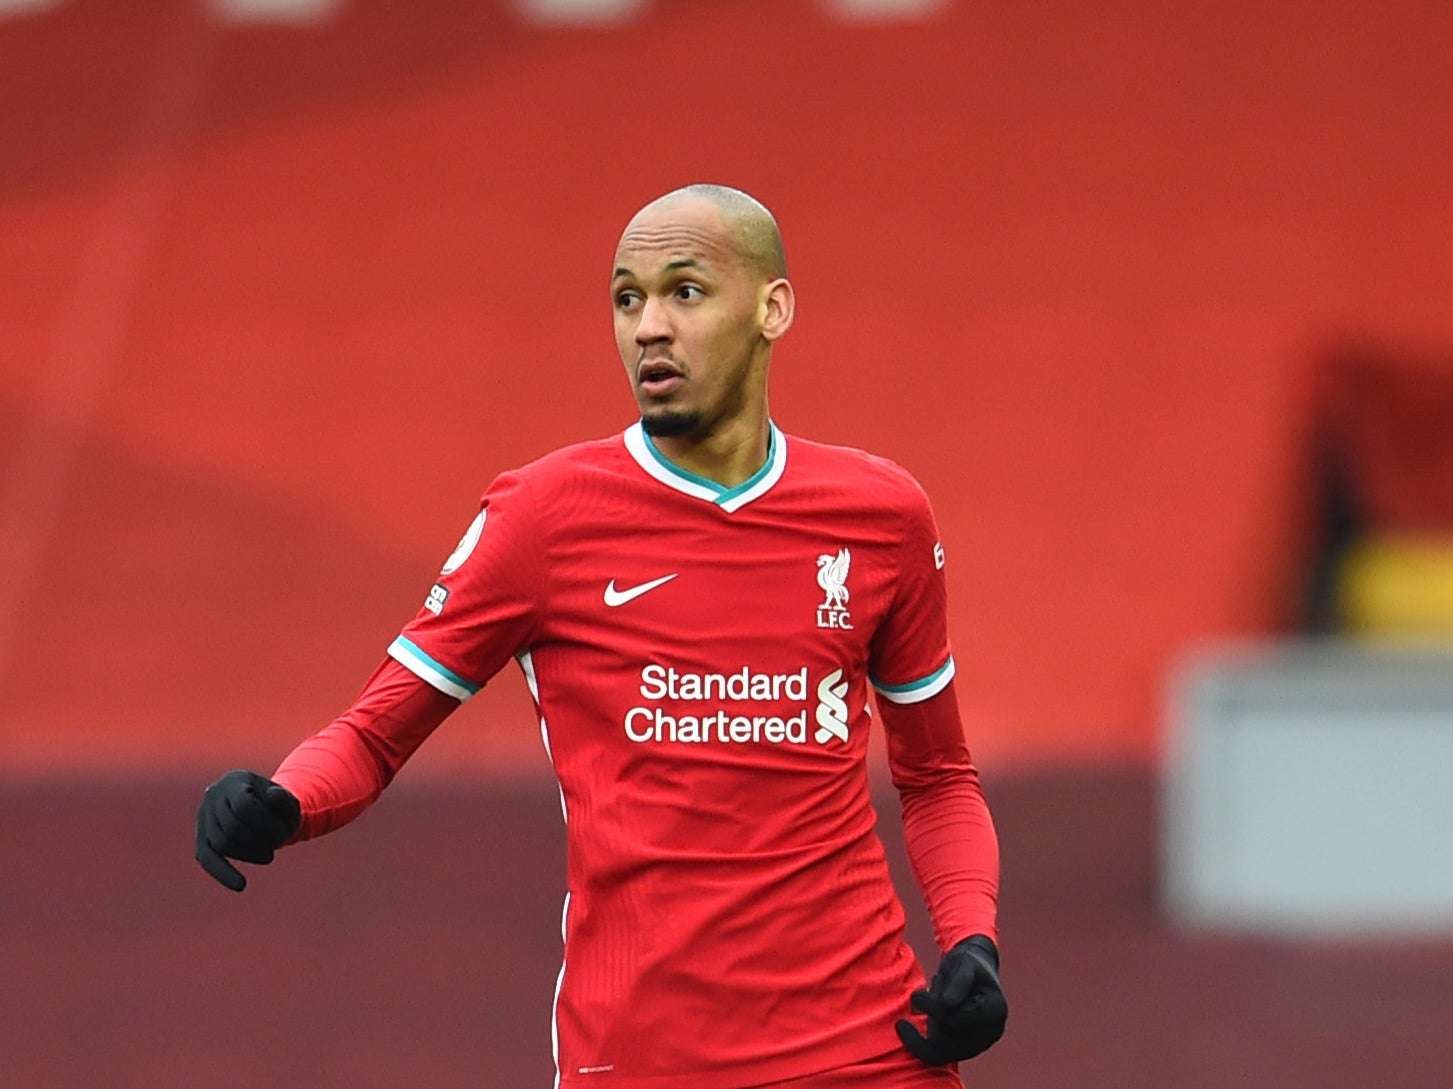 Fabinho has spent much of this season filling in at centre-back